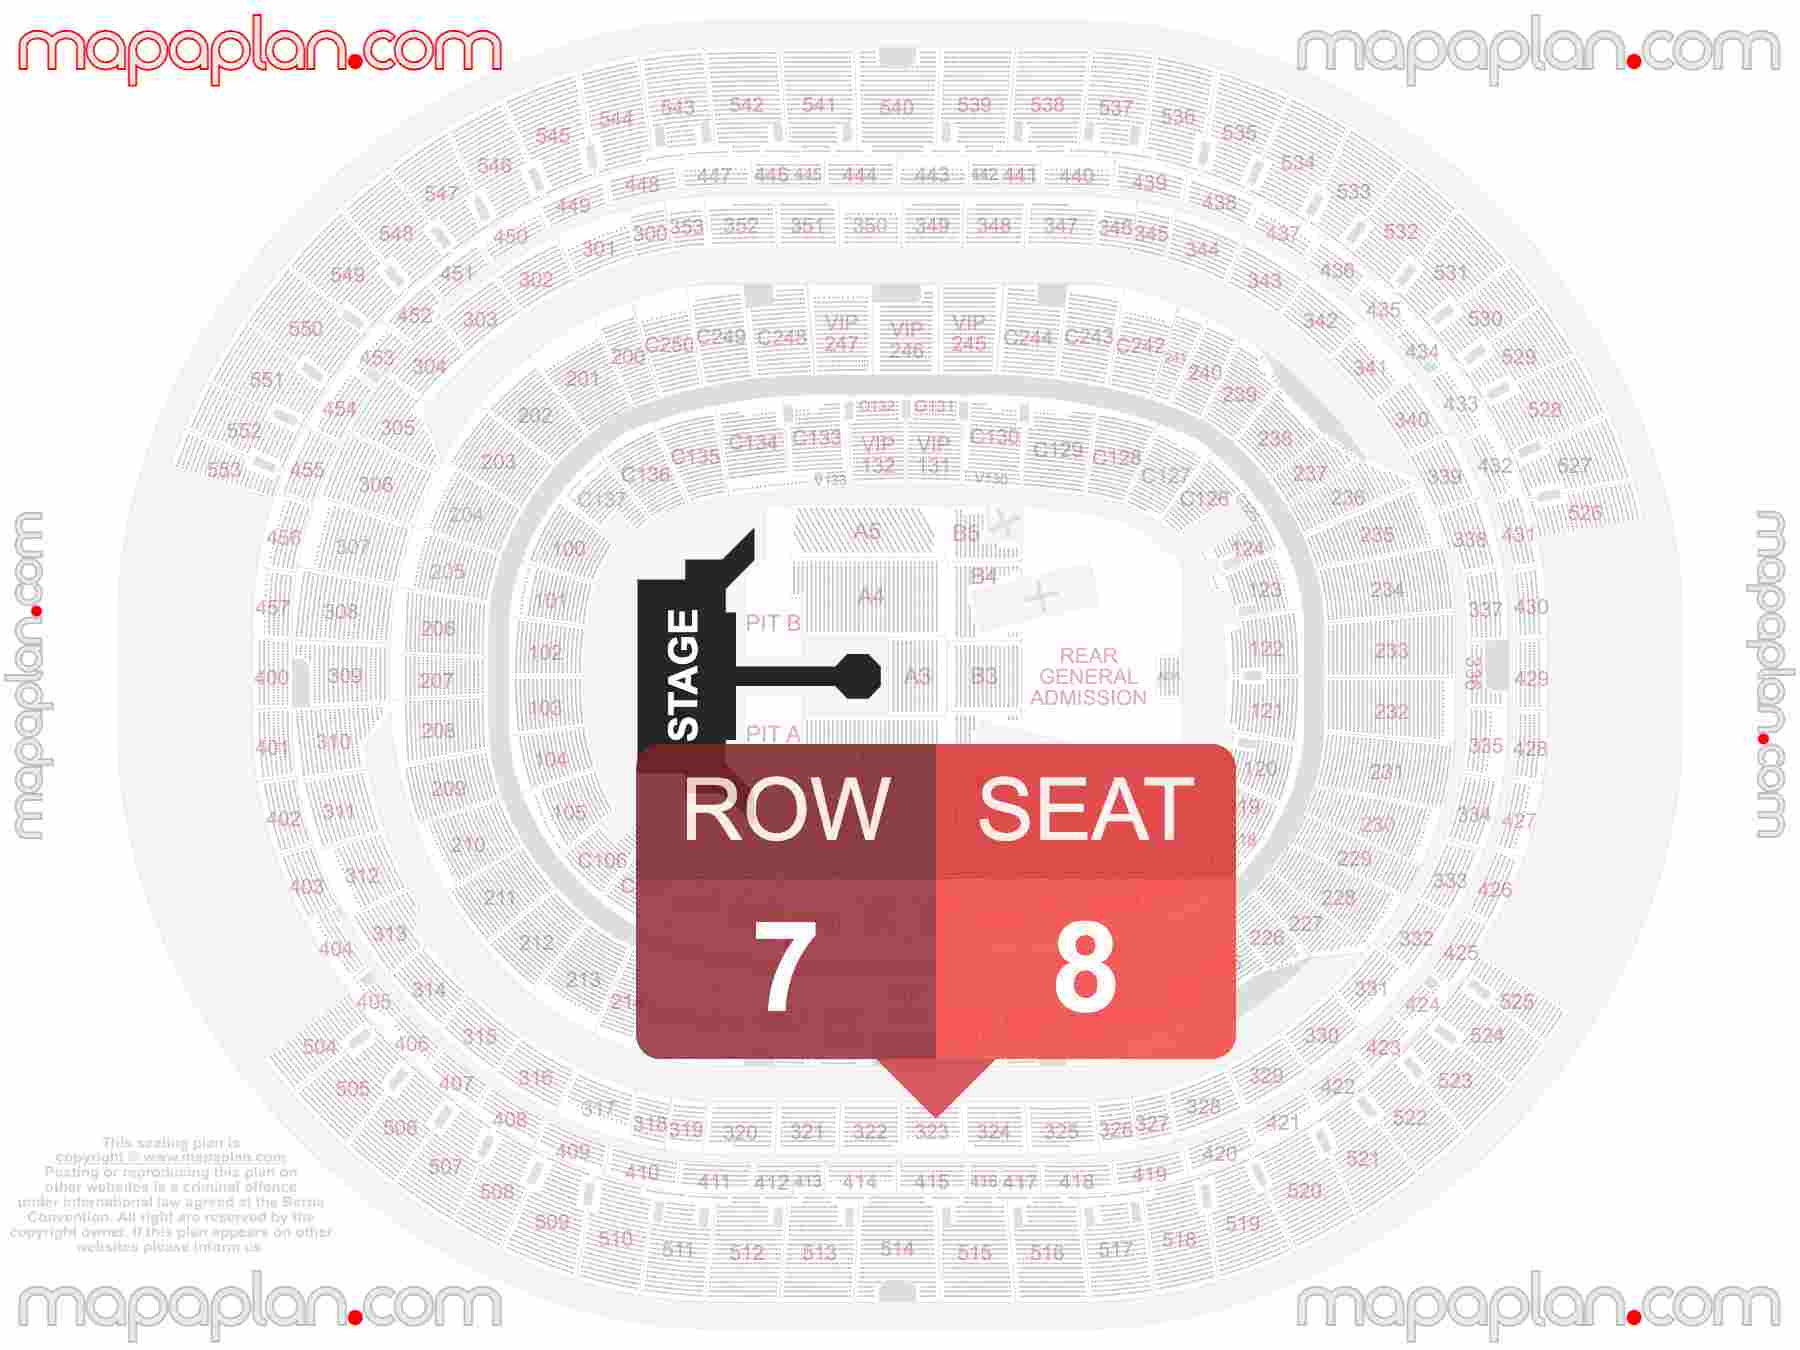 Los Angeles SoFi Stadium seating chart Catwalk extended runway concert B-stage find best seats row numbering system plan showing how many seats per row - Individual 'find my seat' virtual locator